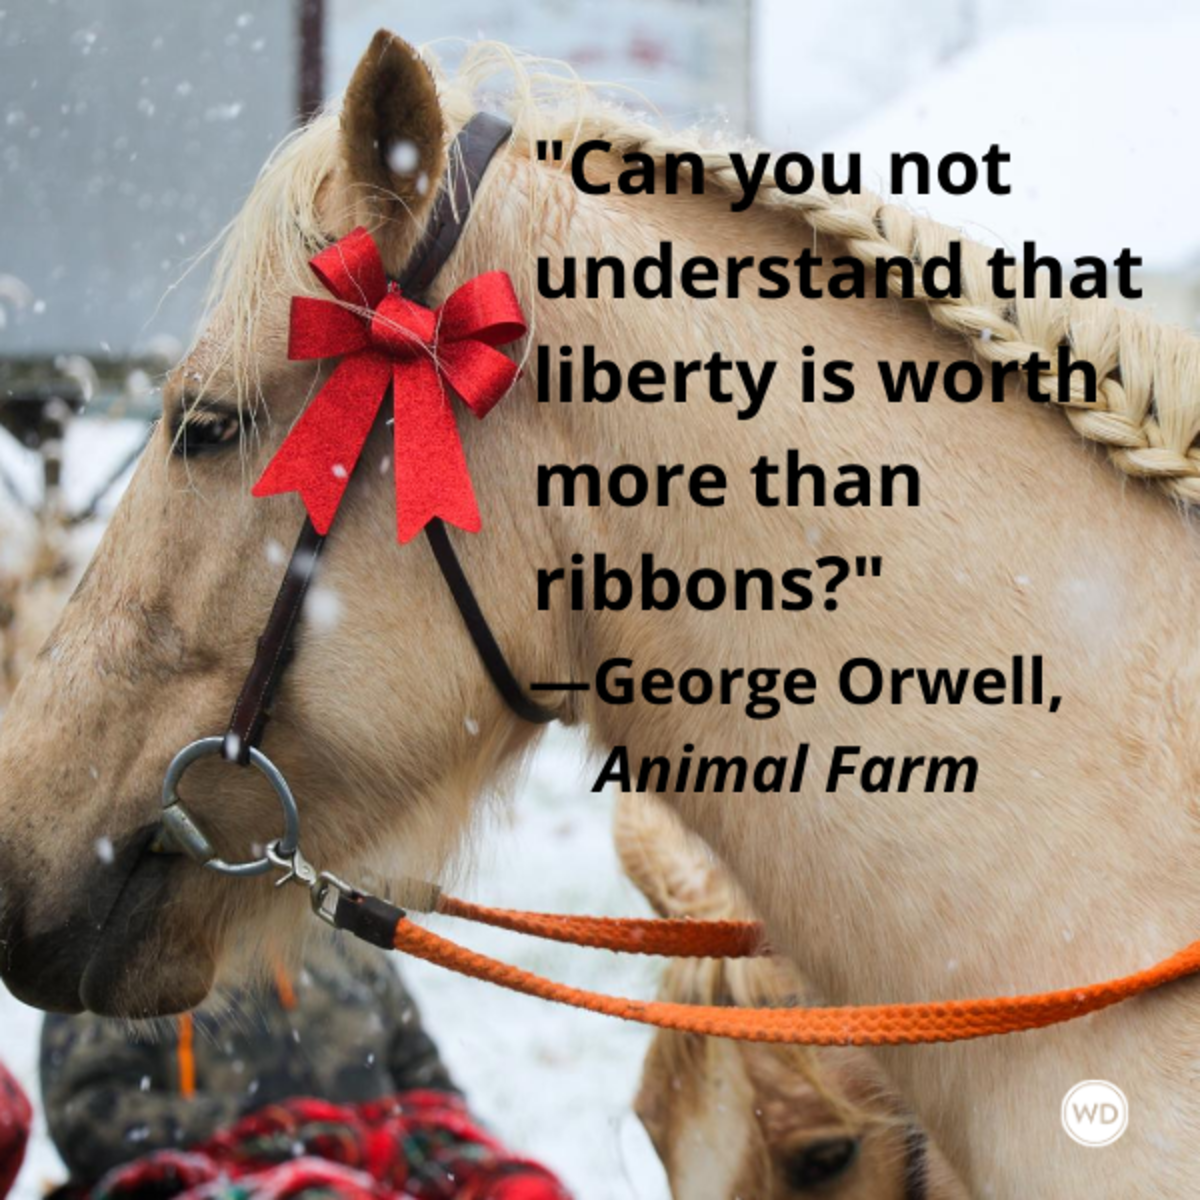 animal_farm_by_george_orwell_quotes_can_you_not_understand_that_liberty_is_worth_more_than_ribbons